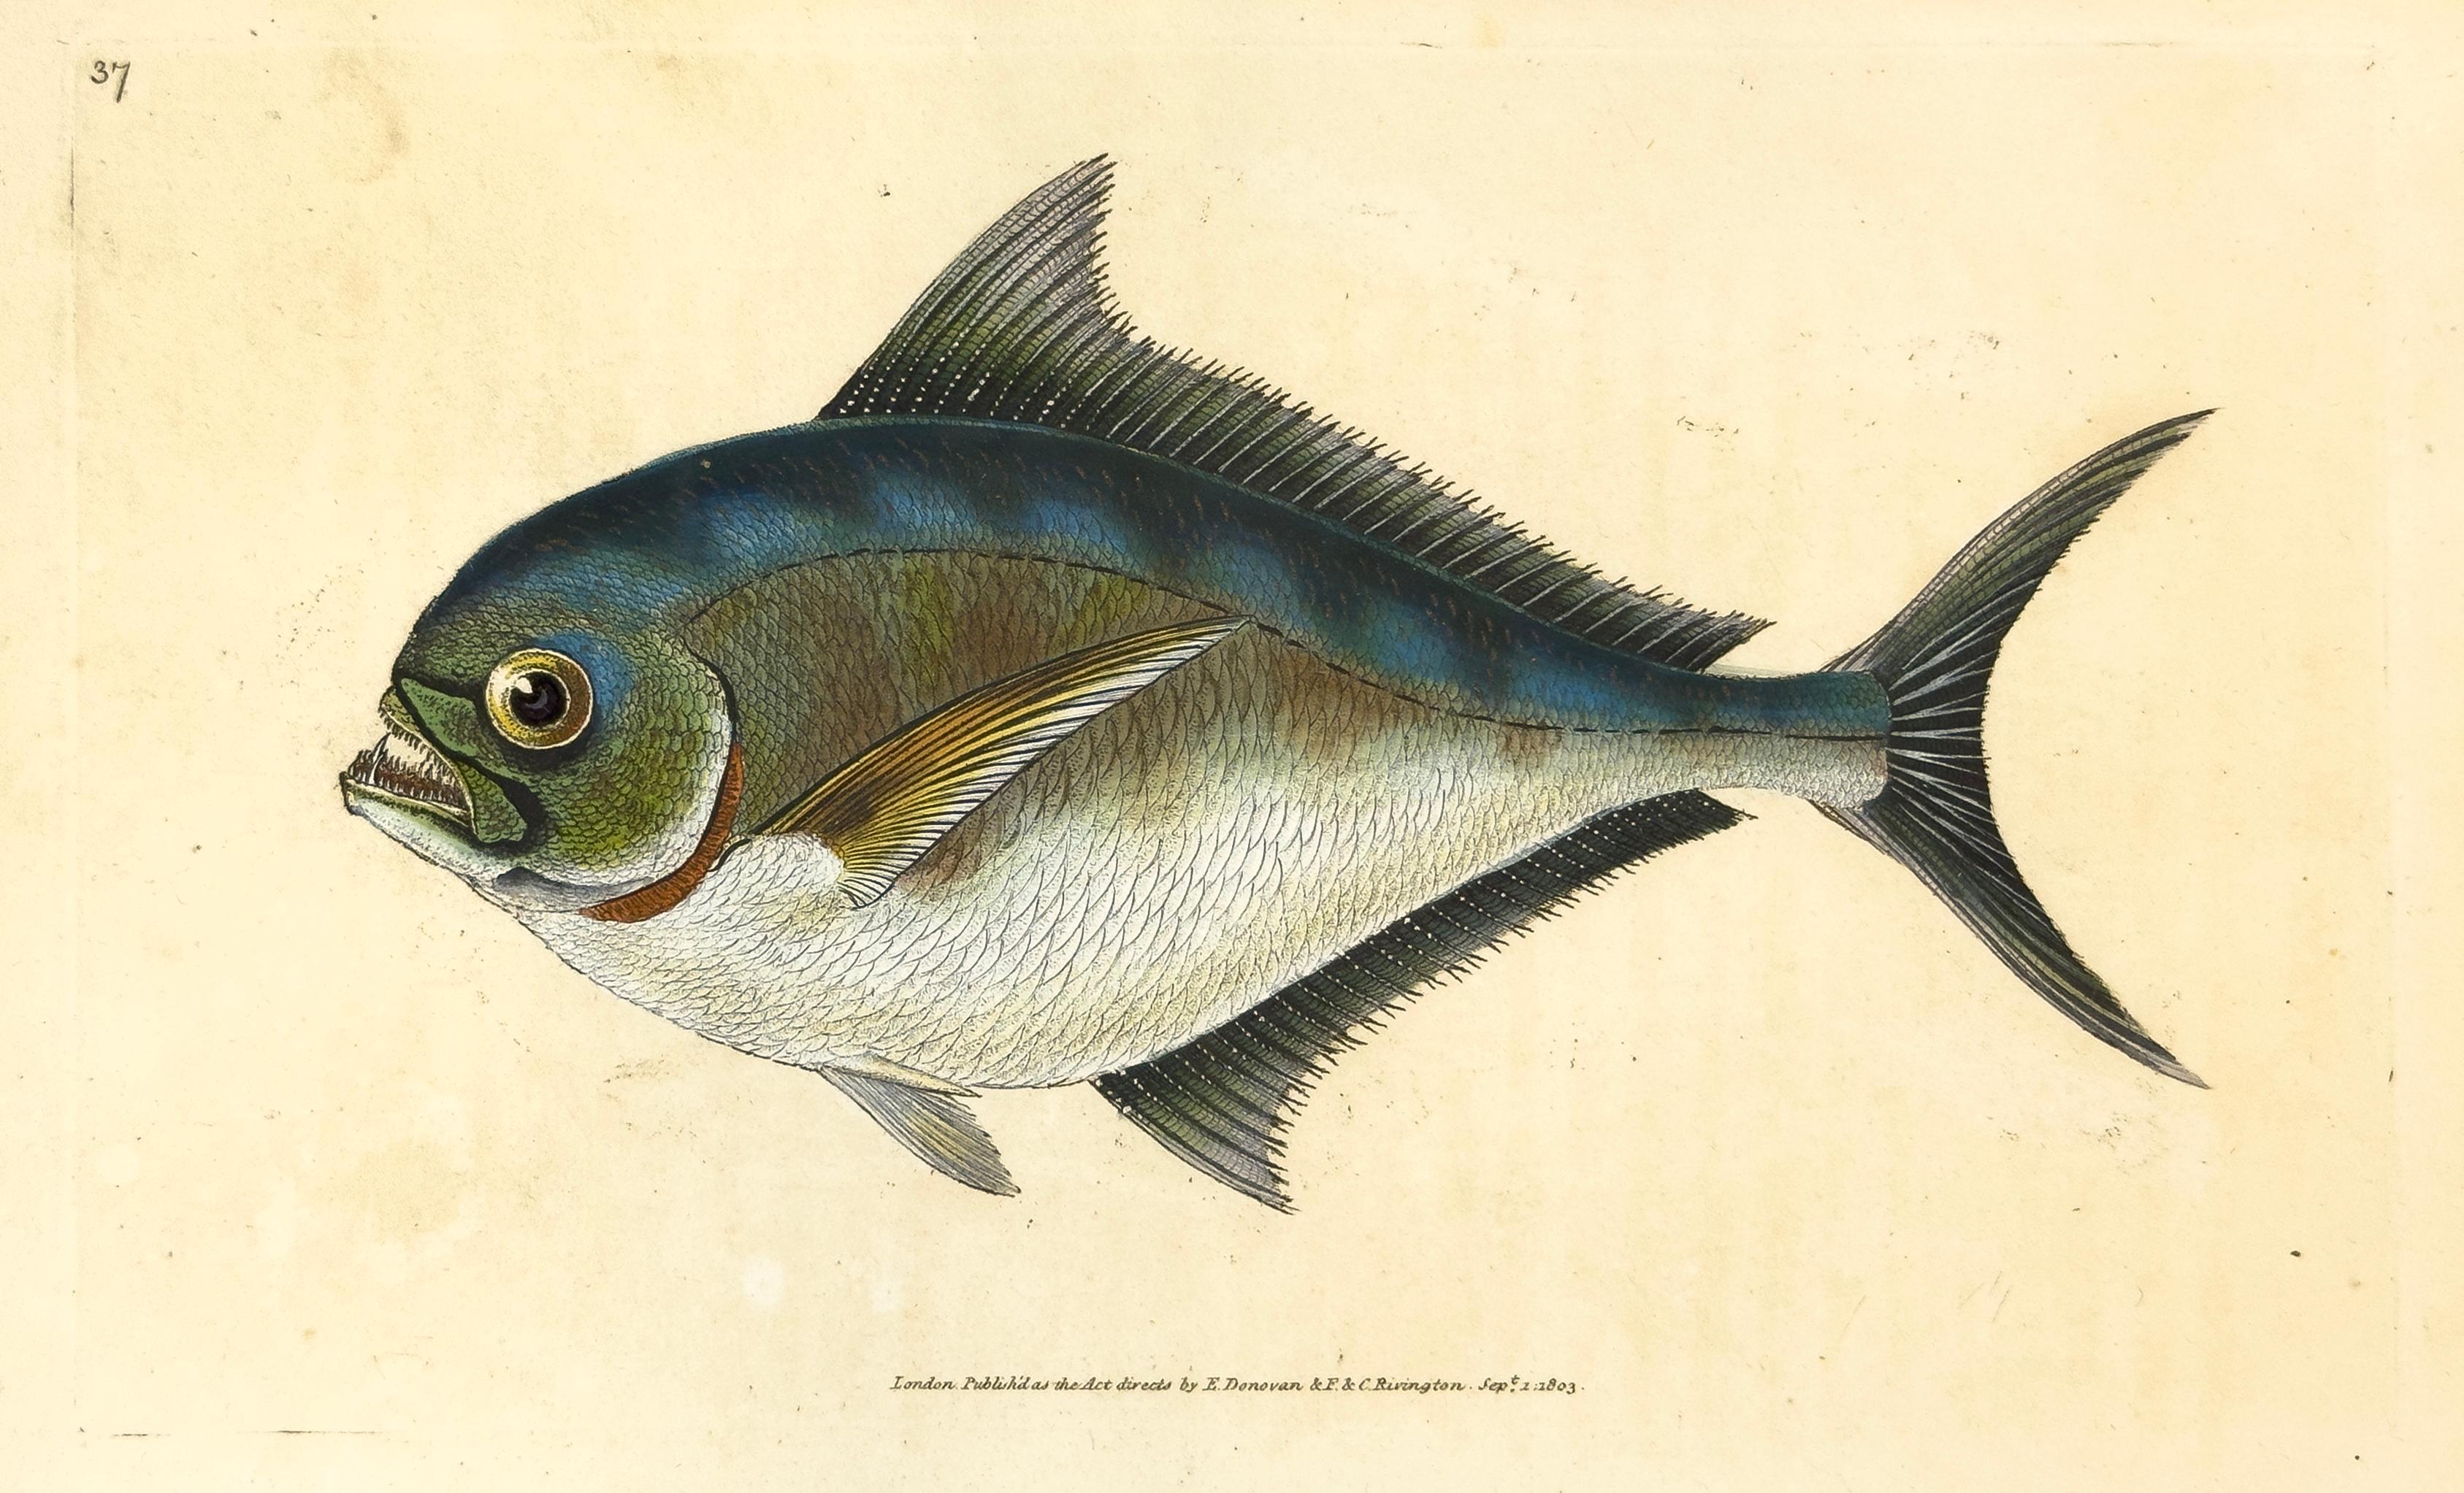 Edward Donovan Print - 37: Sparus rail, Ray's Toothed Gilt-Head